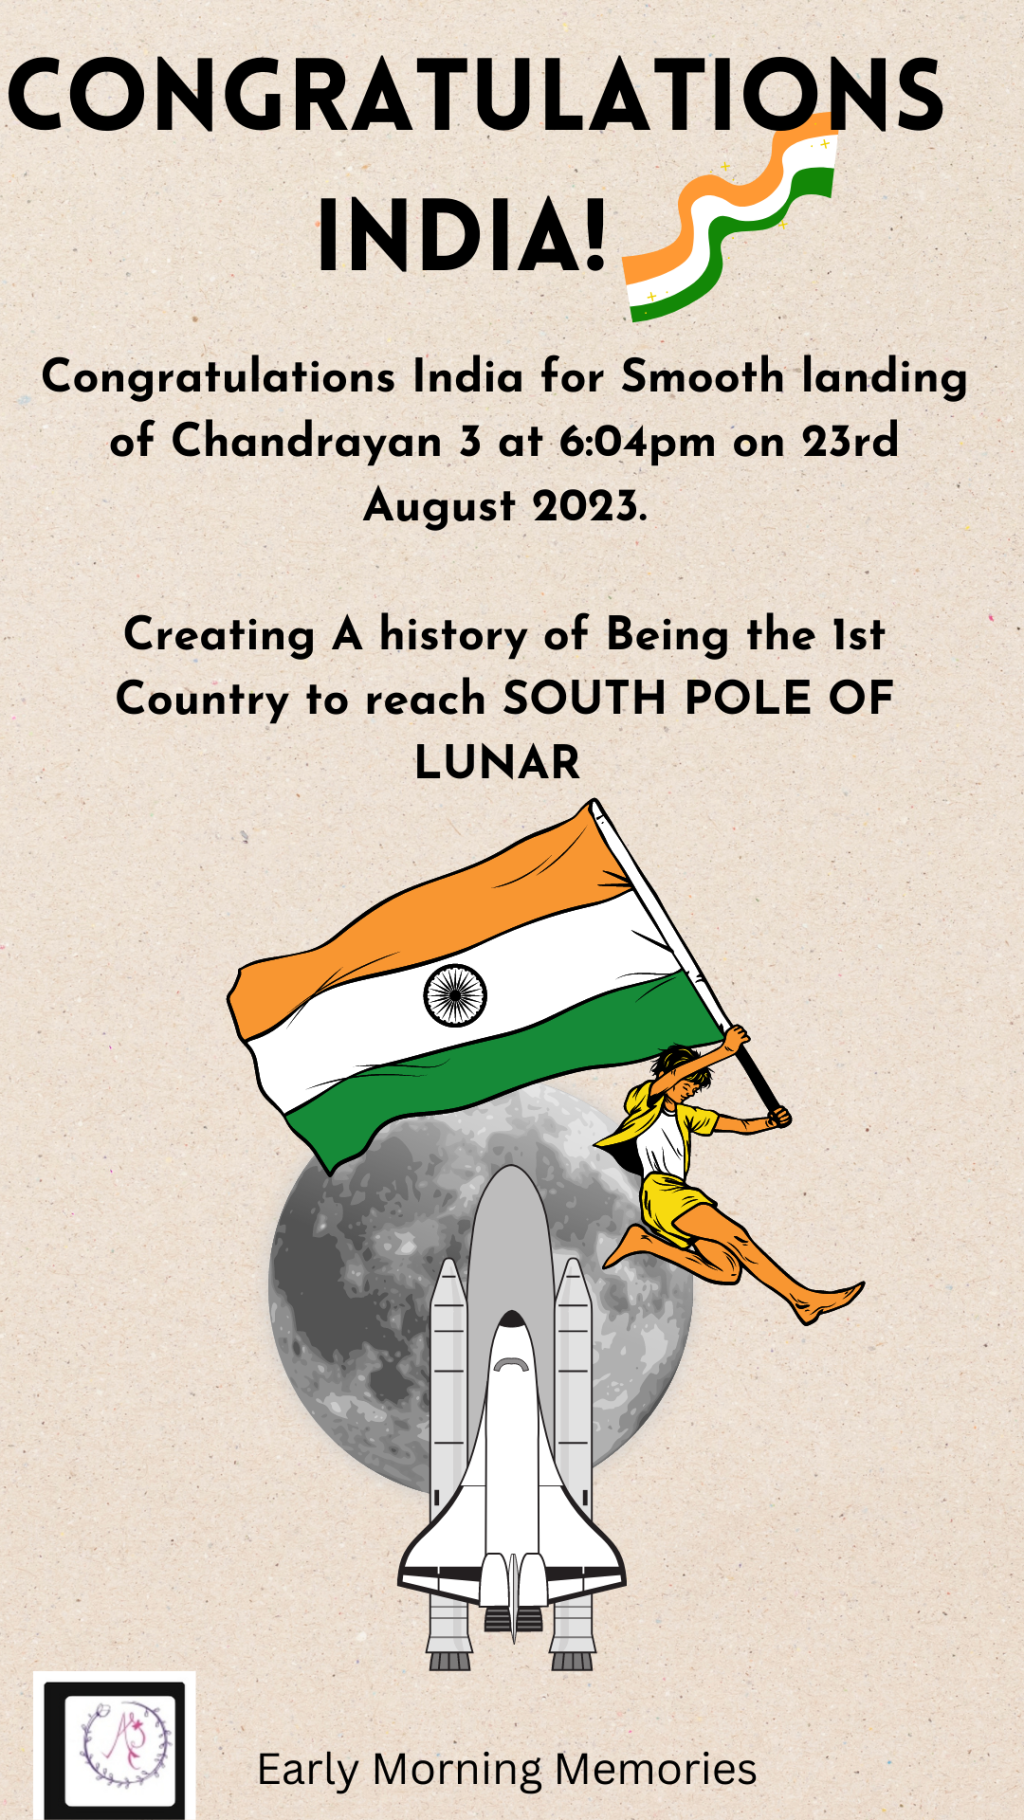 Chandrayan 3: The history created ! Indian Spacecraft smoothly reached Moon South Pole